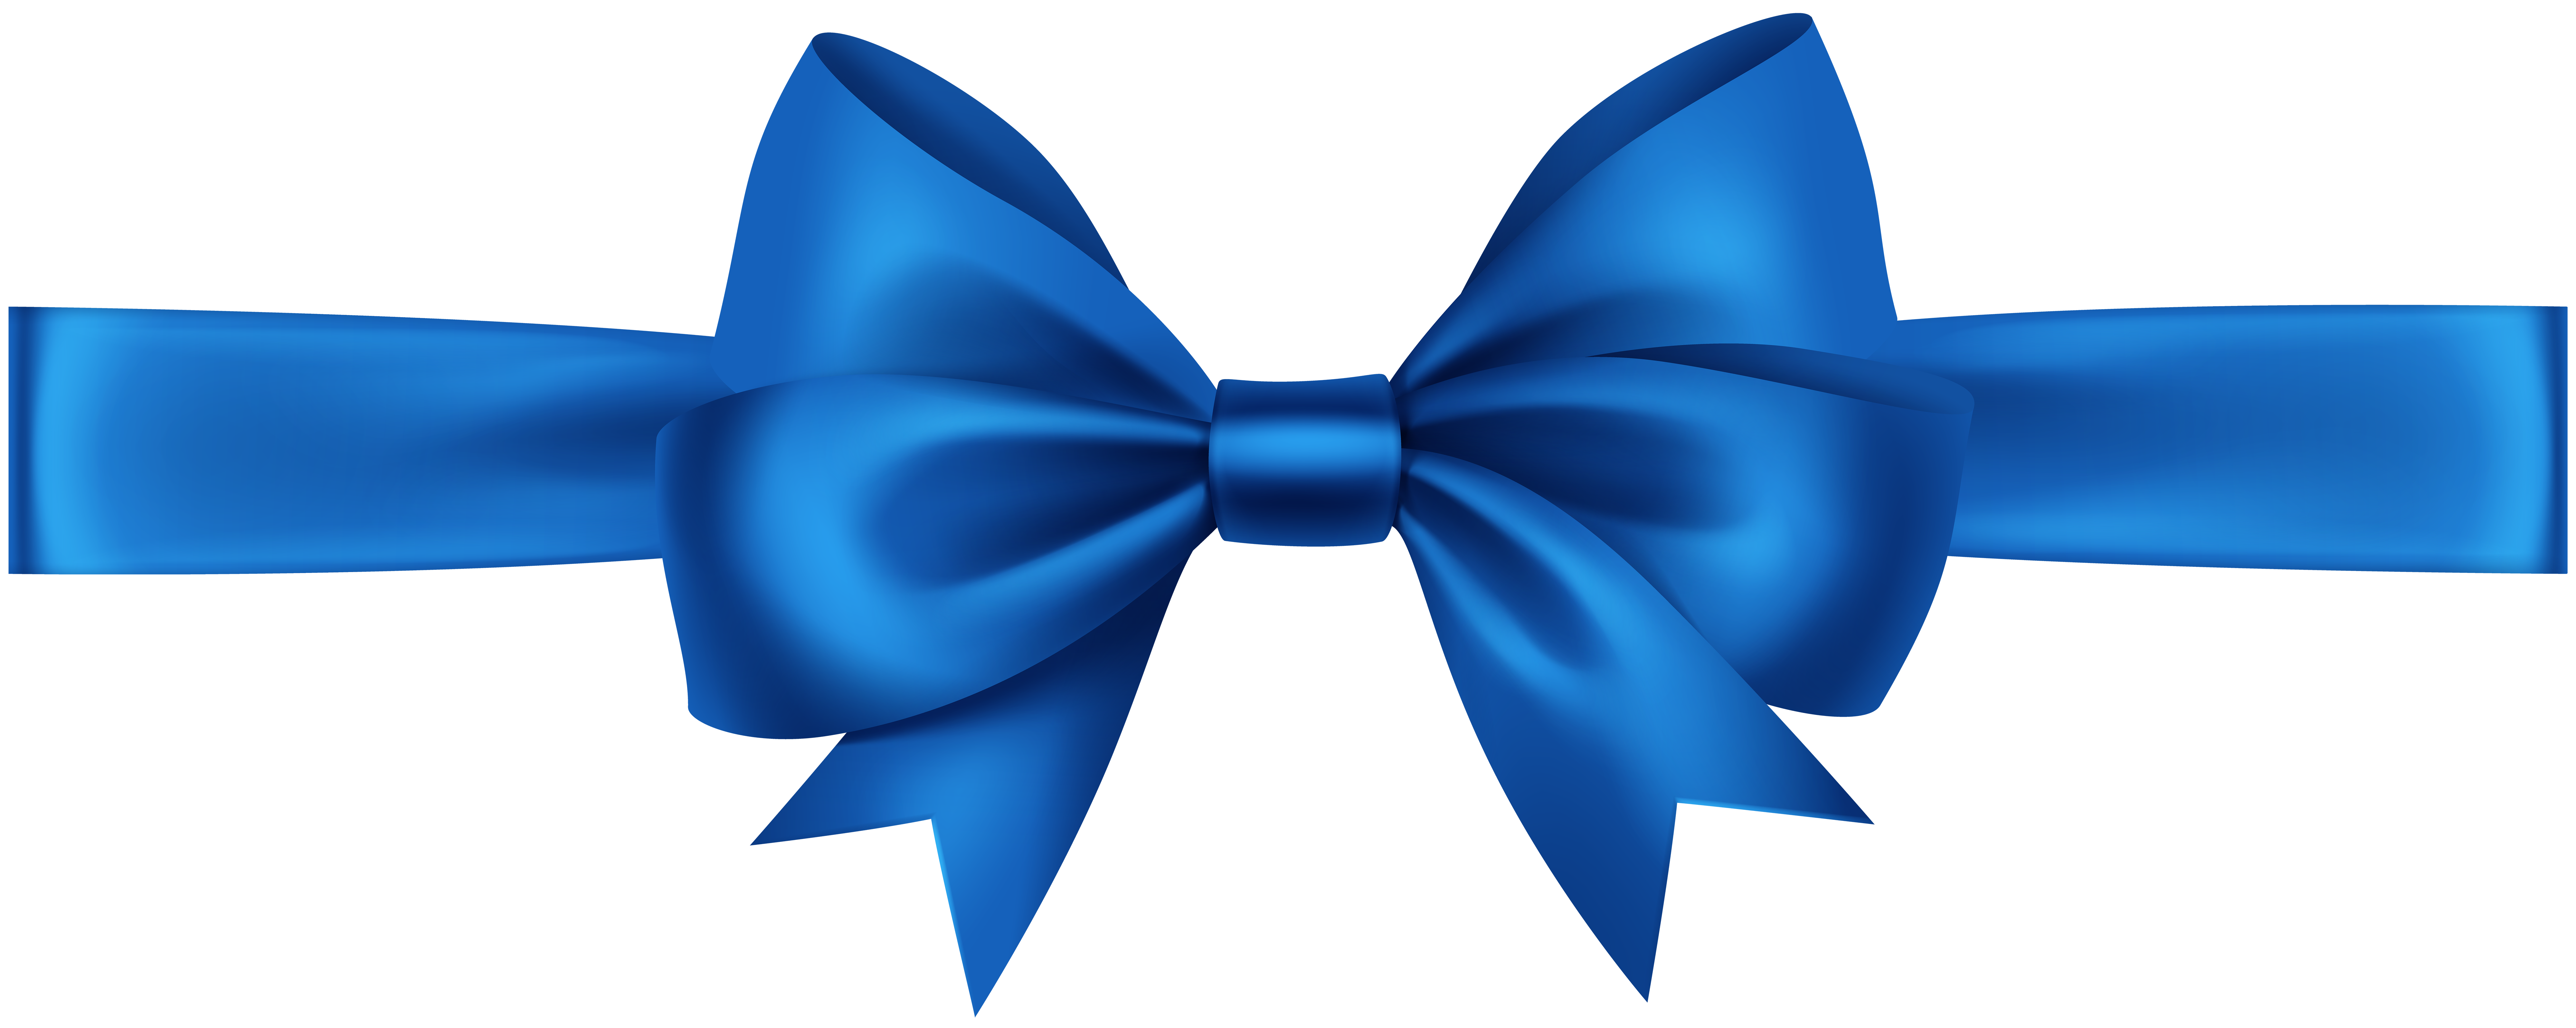 Ribbon with Bow Blue Transparent PNG Clip Art Image​  Gallery Yopriceville  - High-Quality Free Images and Transparent PNG Clipart